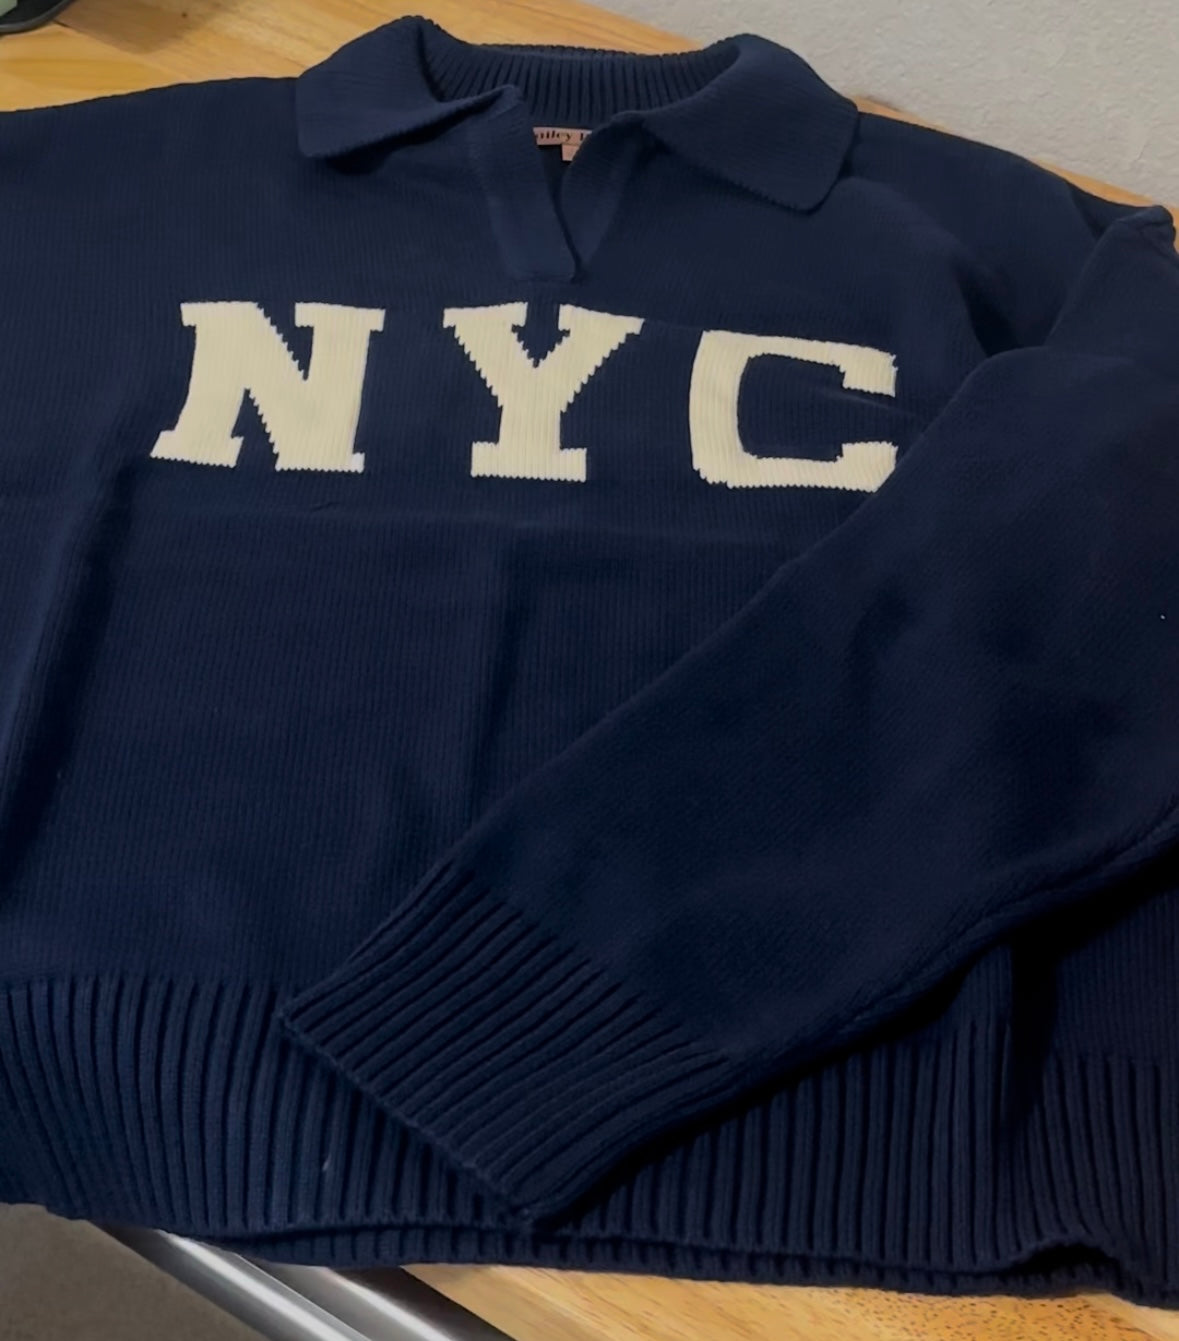 NYC Knit Sweater Top